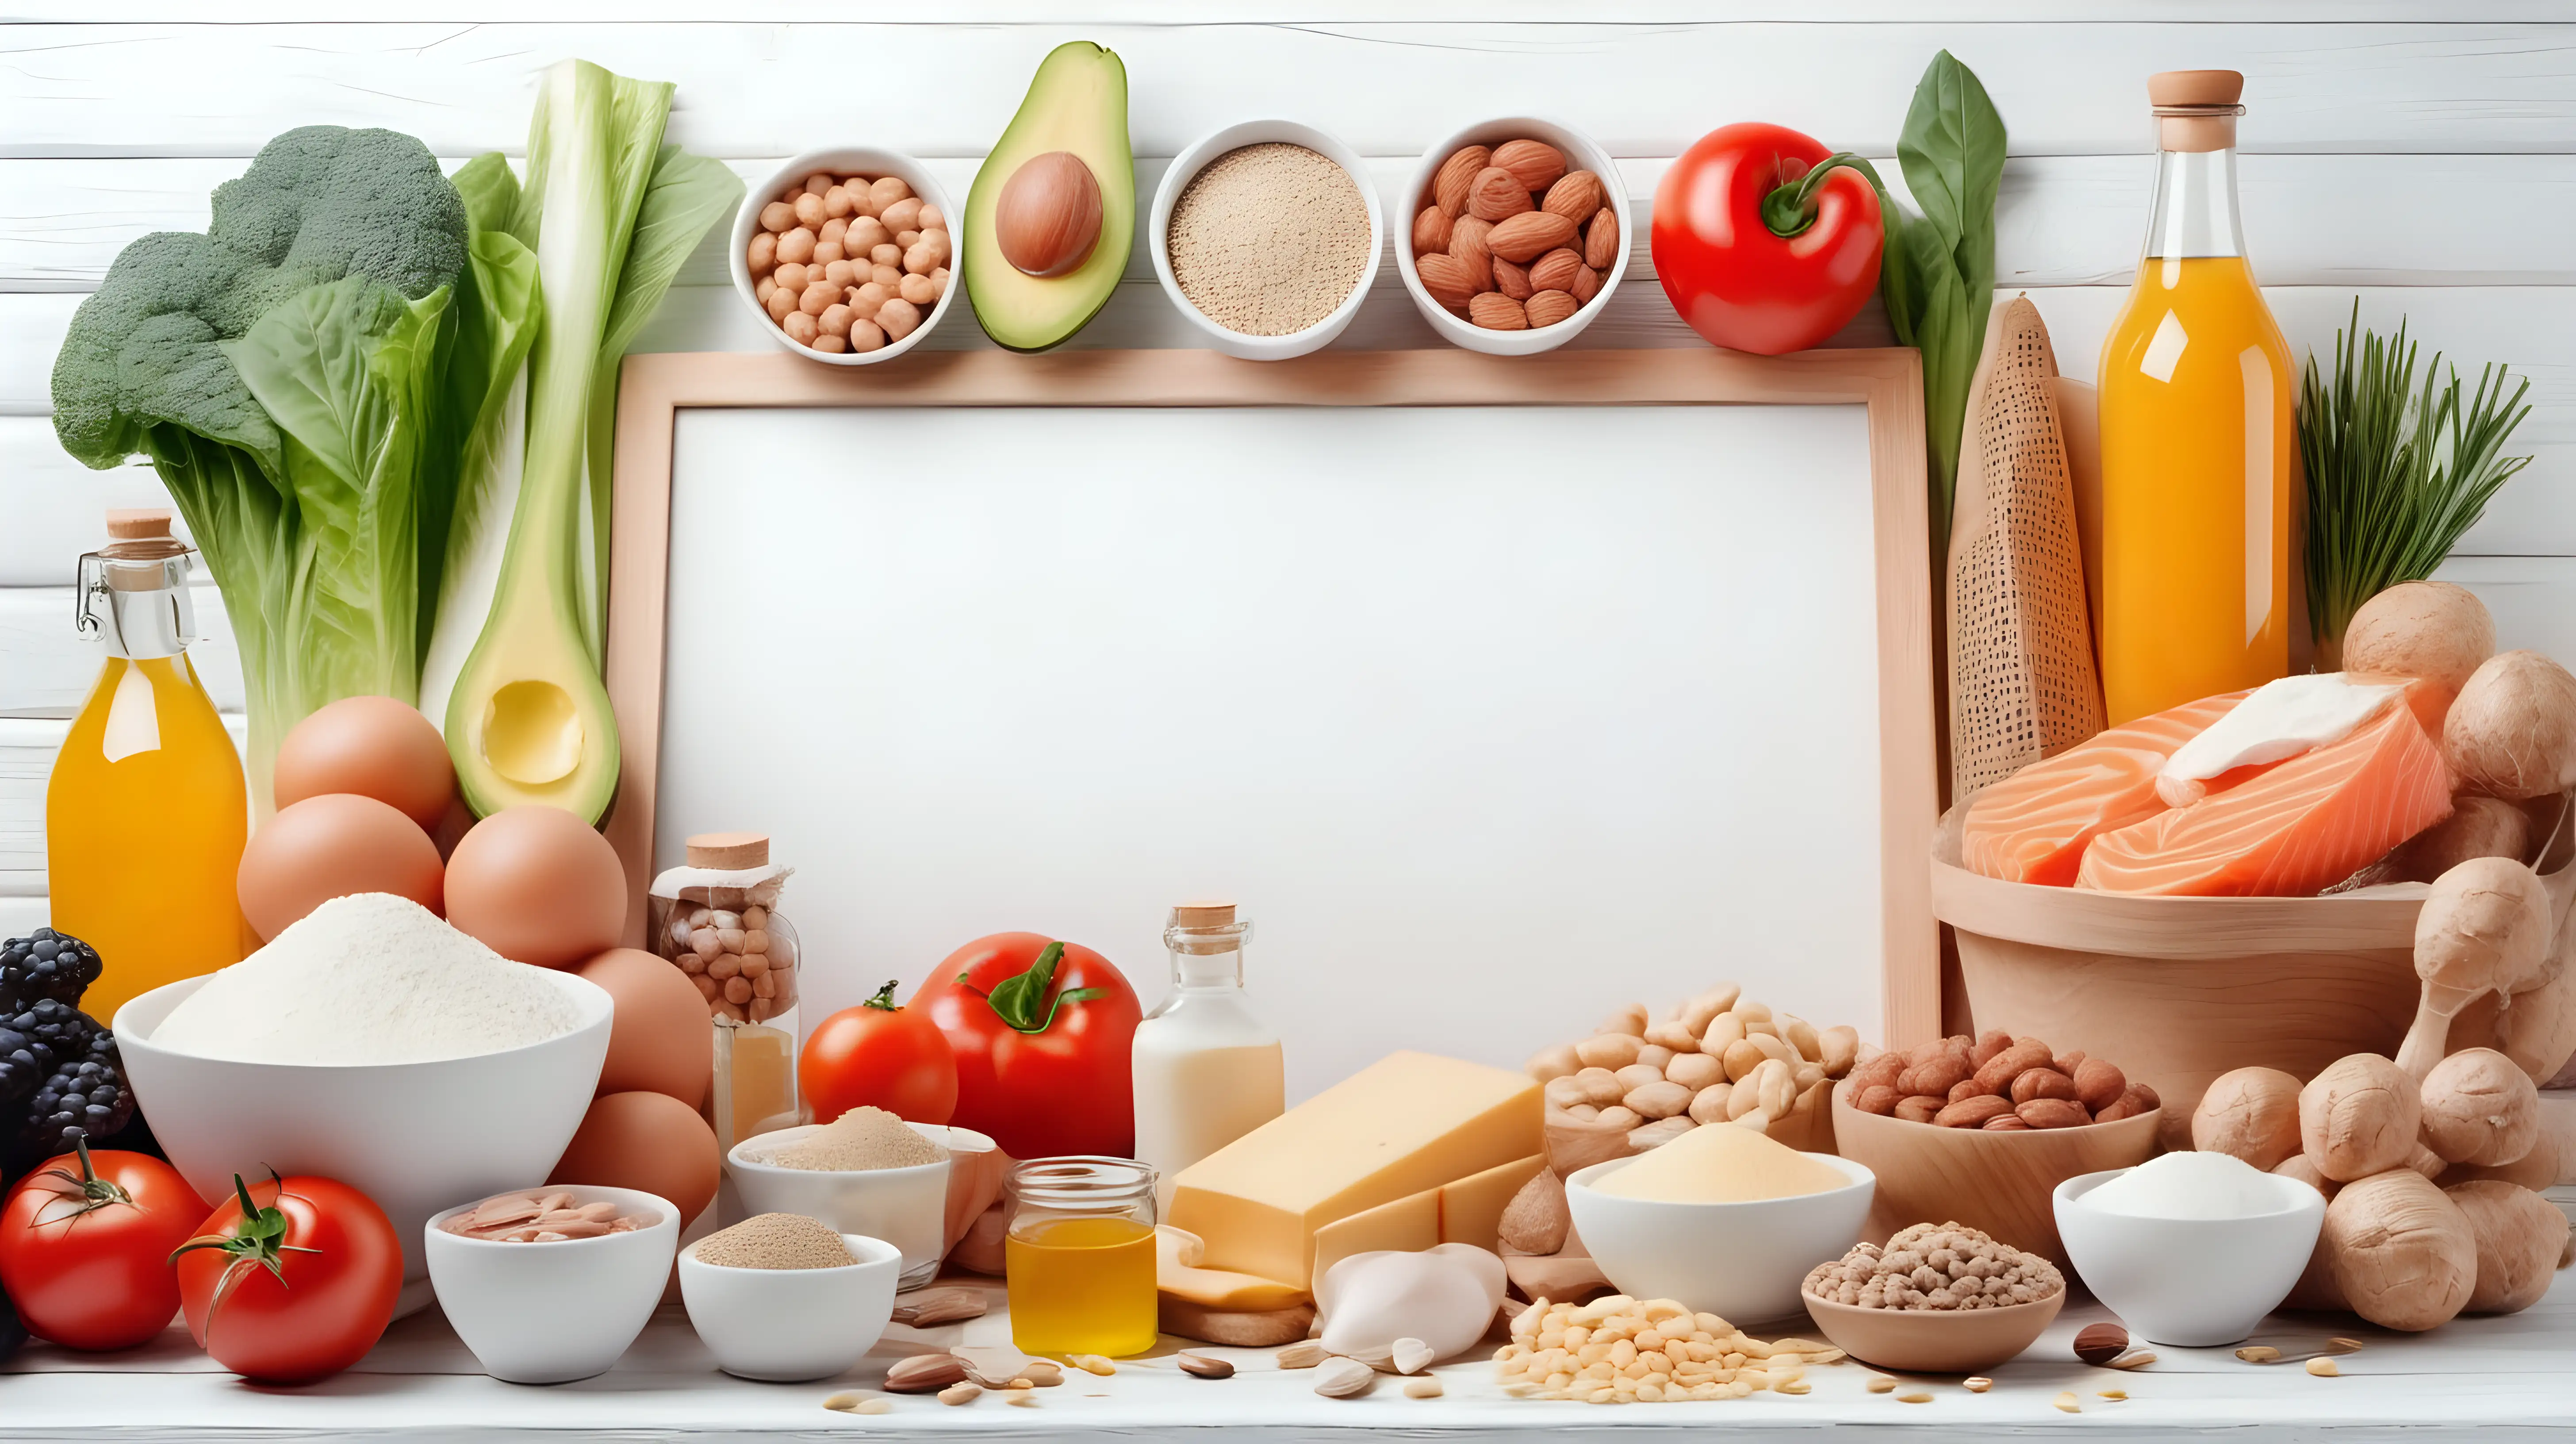 Composition with food products, ingredients of healthy diet, wooden  table, white background, copy space, photo shoot